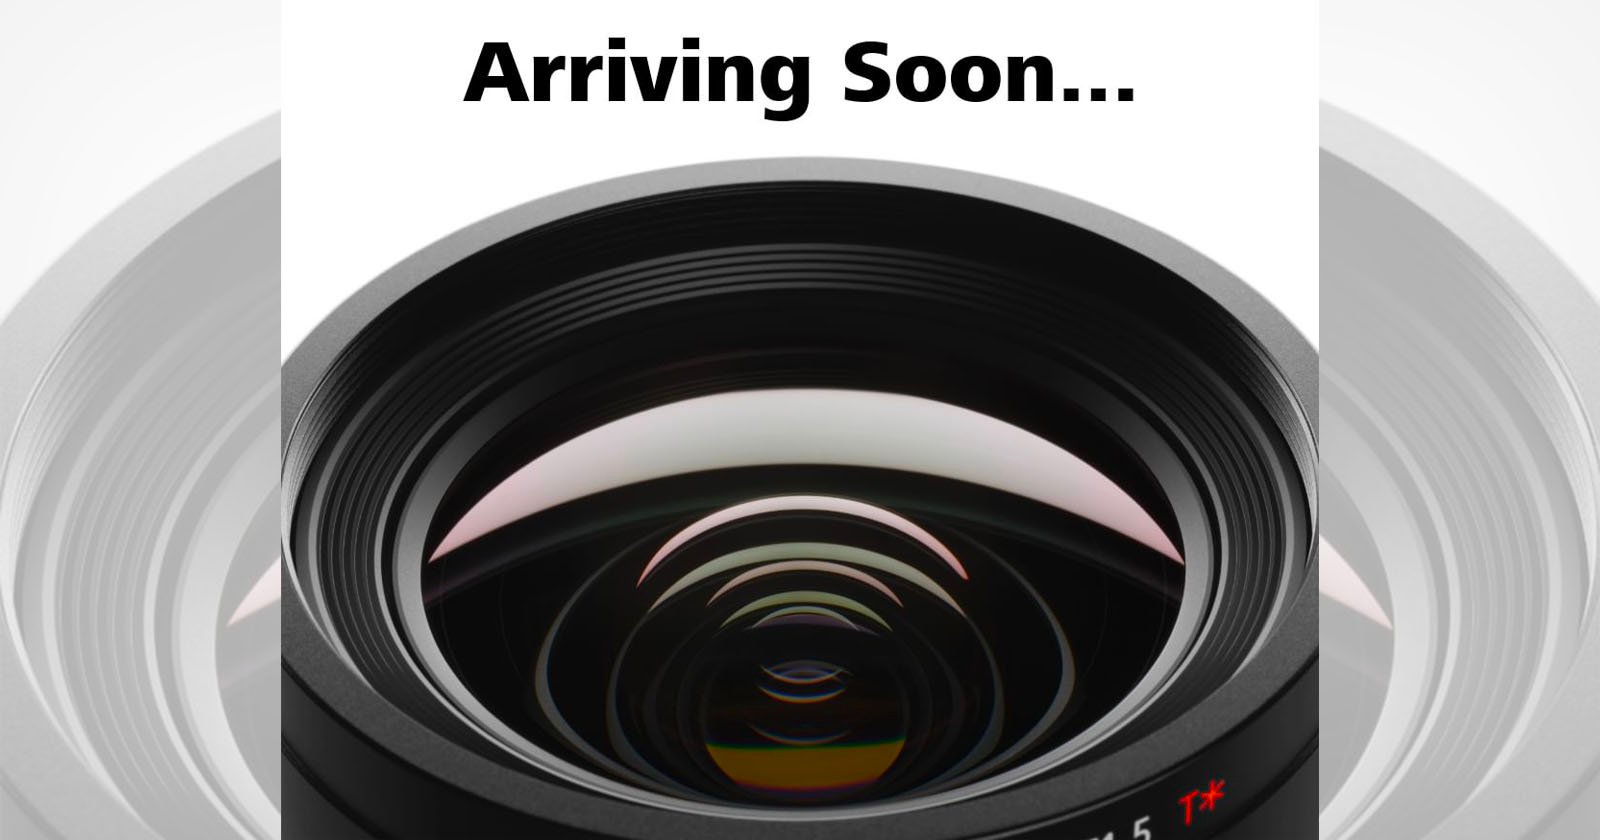  zeiss teases lens arriving soon approaching 